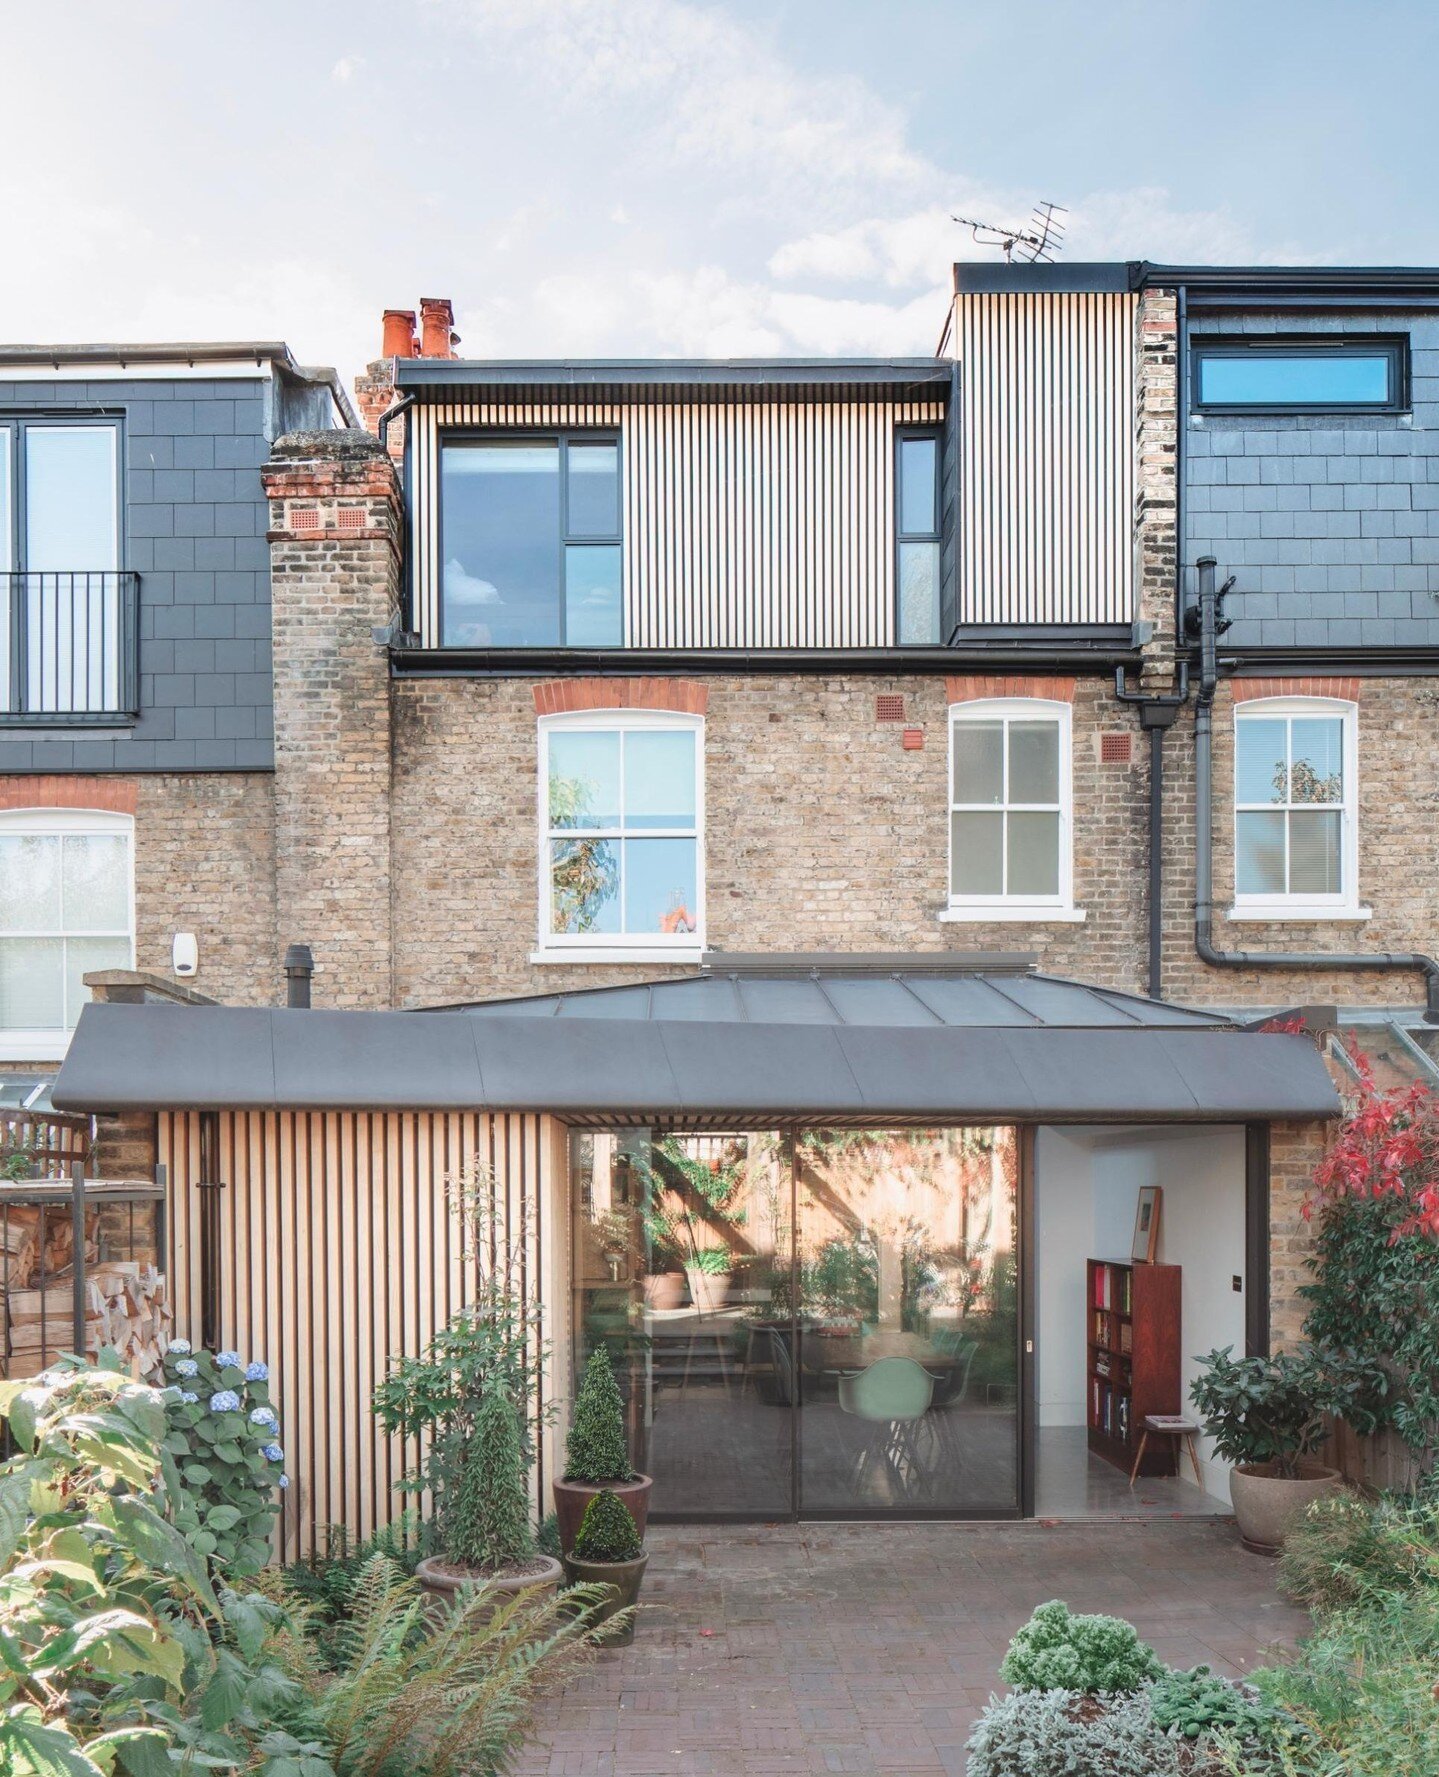 Located in Herne Hill, our recently completed project is a unique extension and renovation to a terraced period property. At ground floor, a full width extension, clad in a rich Accoya finned cladding with large cantilevered Zinc roof, houses a recon